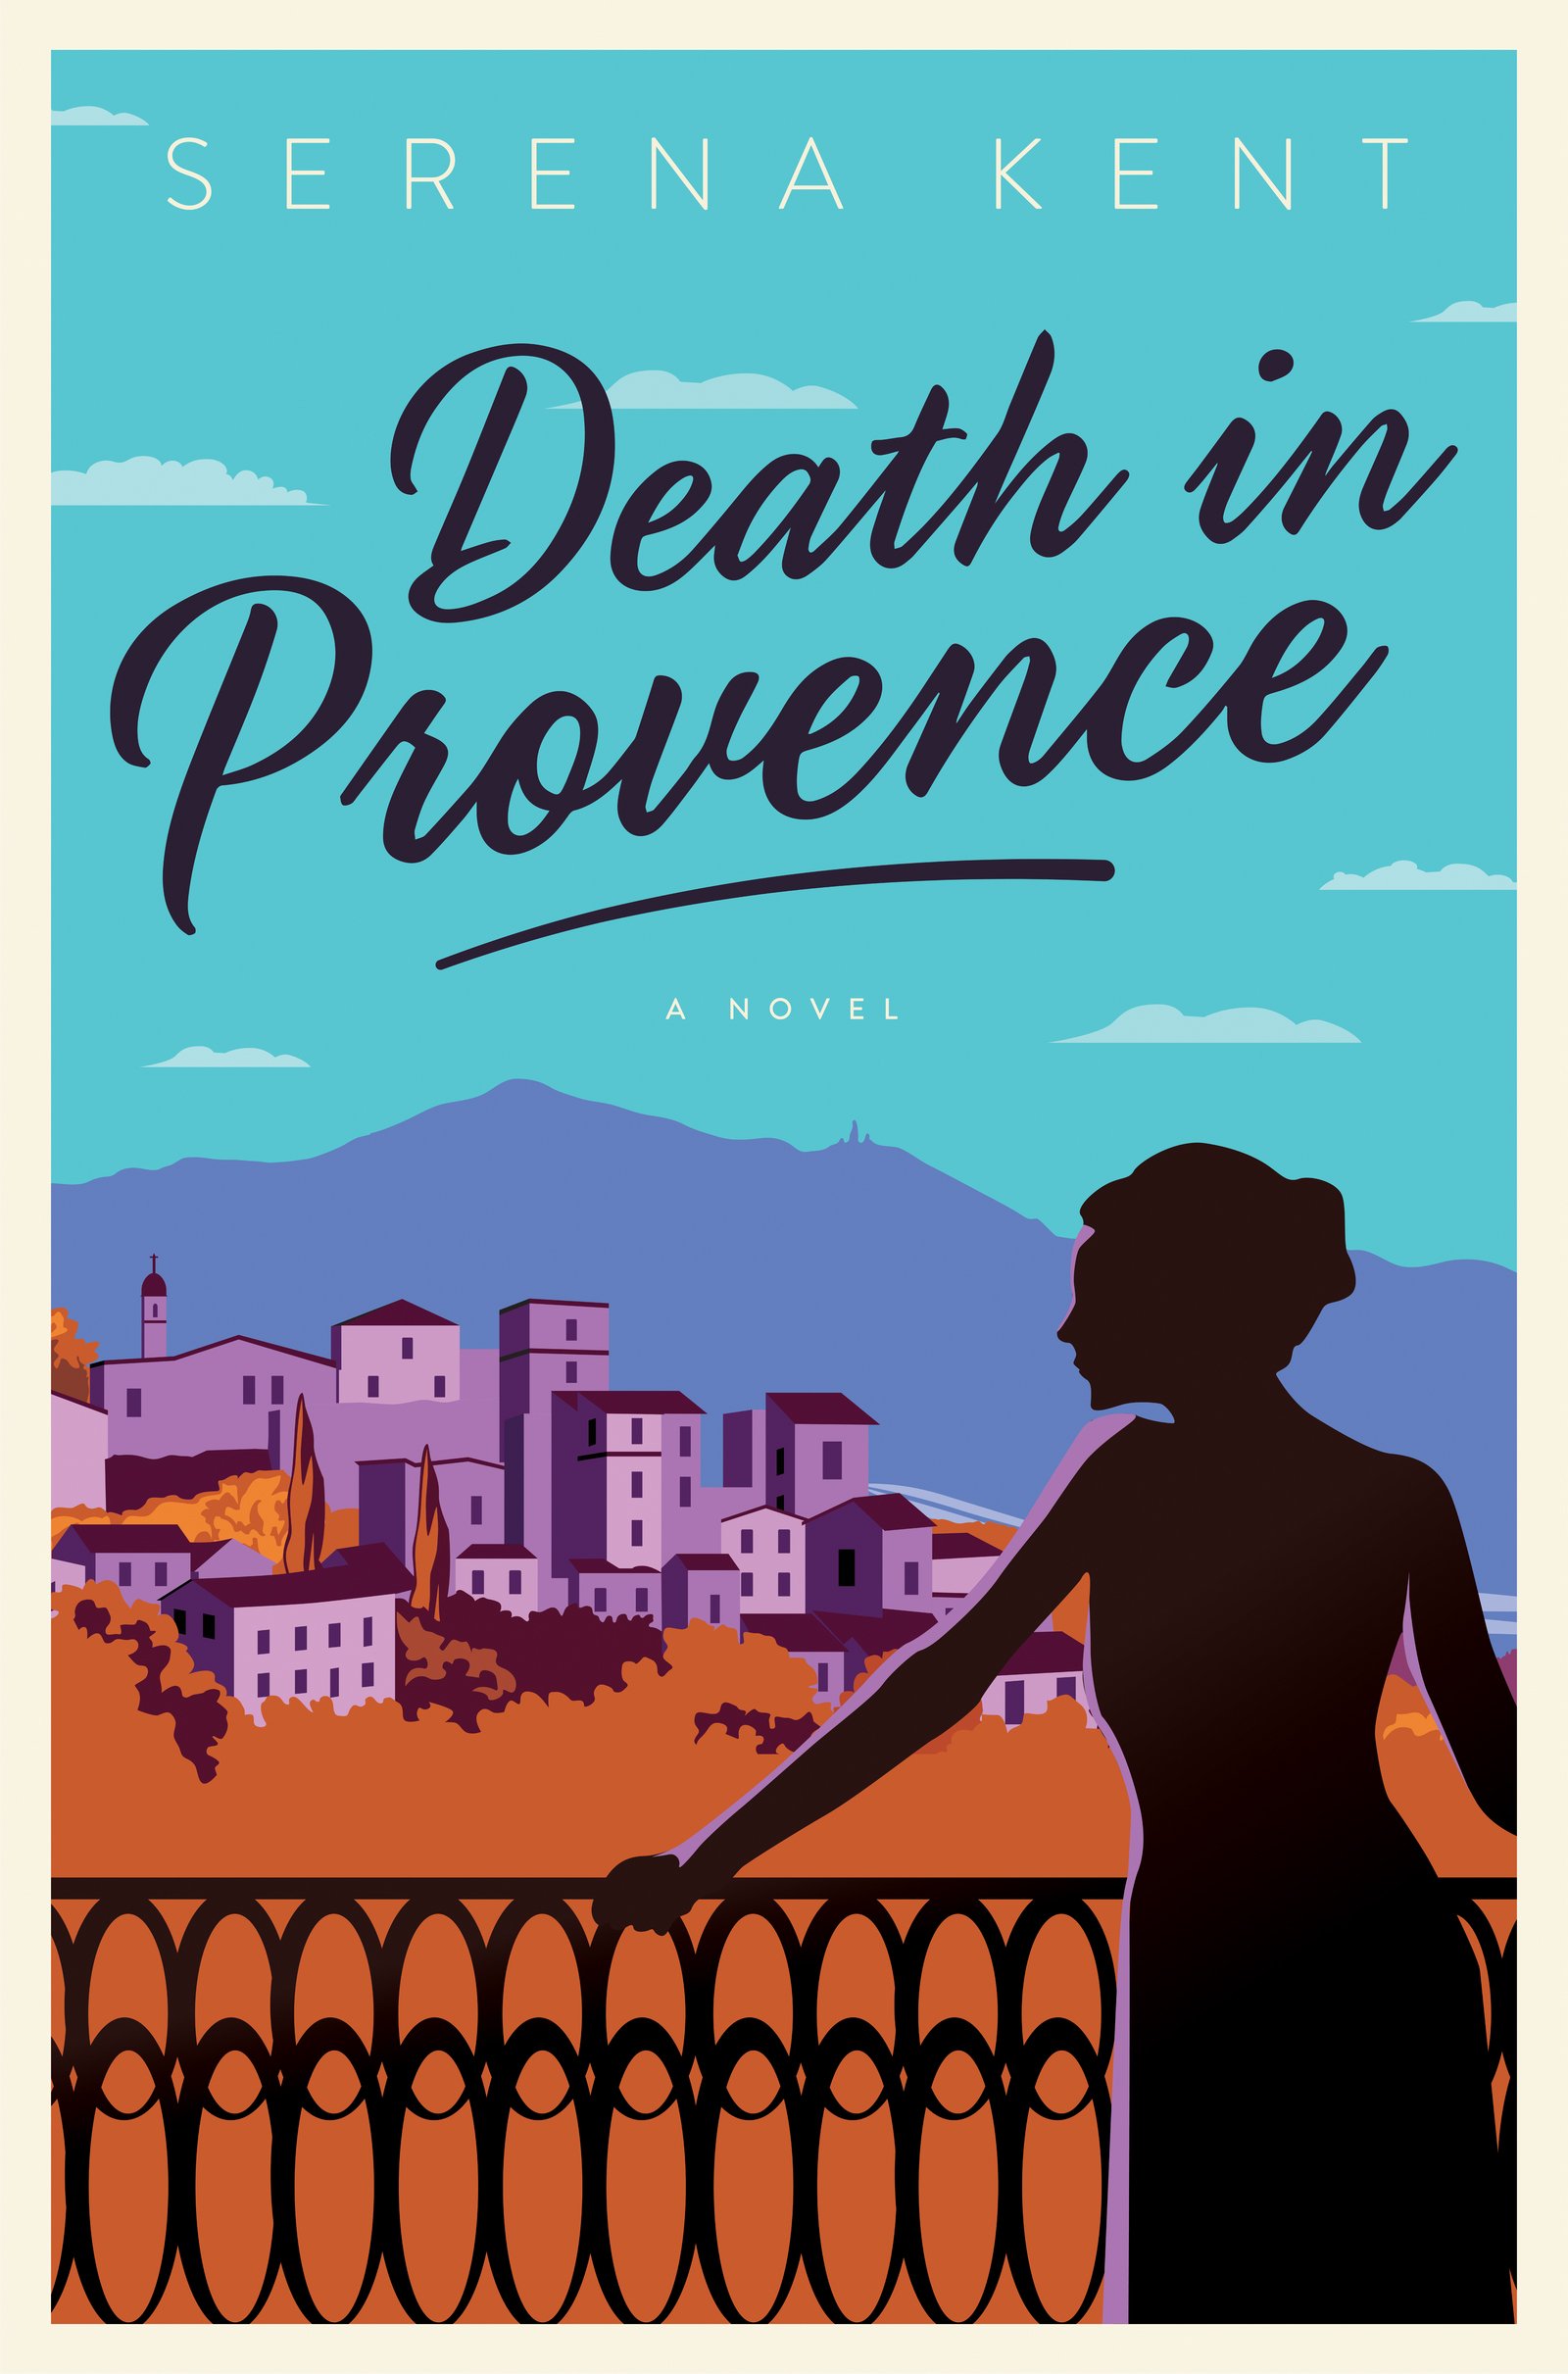 Cover of "Death in Provence" by Serena Kent